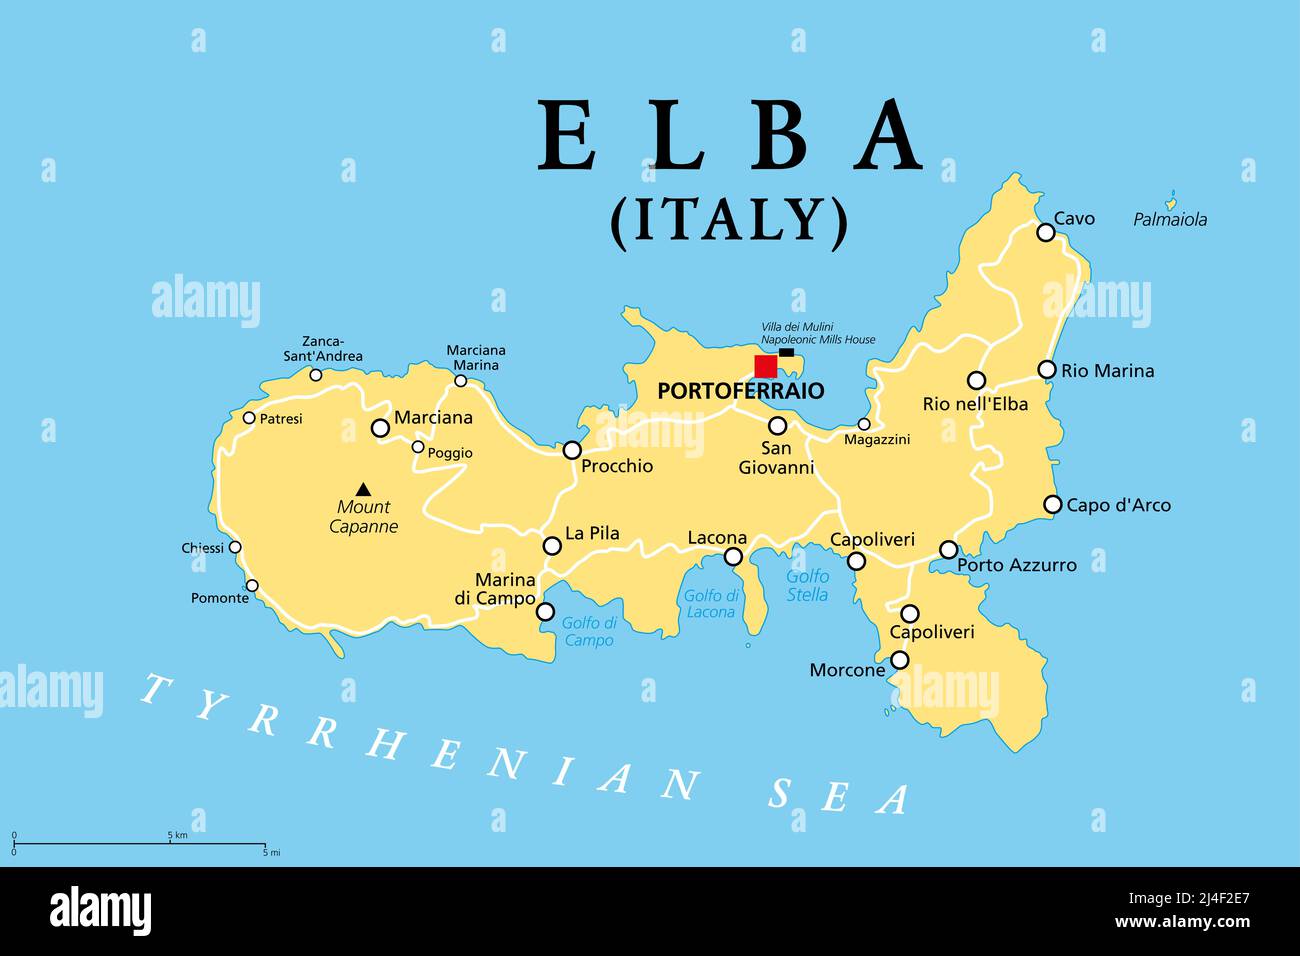 Elba, political map, Mediterranean island in Tuscany, Italy, with capital Portoferraio. Site of the first exile of Napoleon. Stock Photo